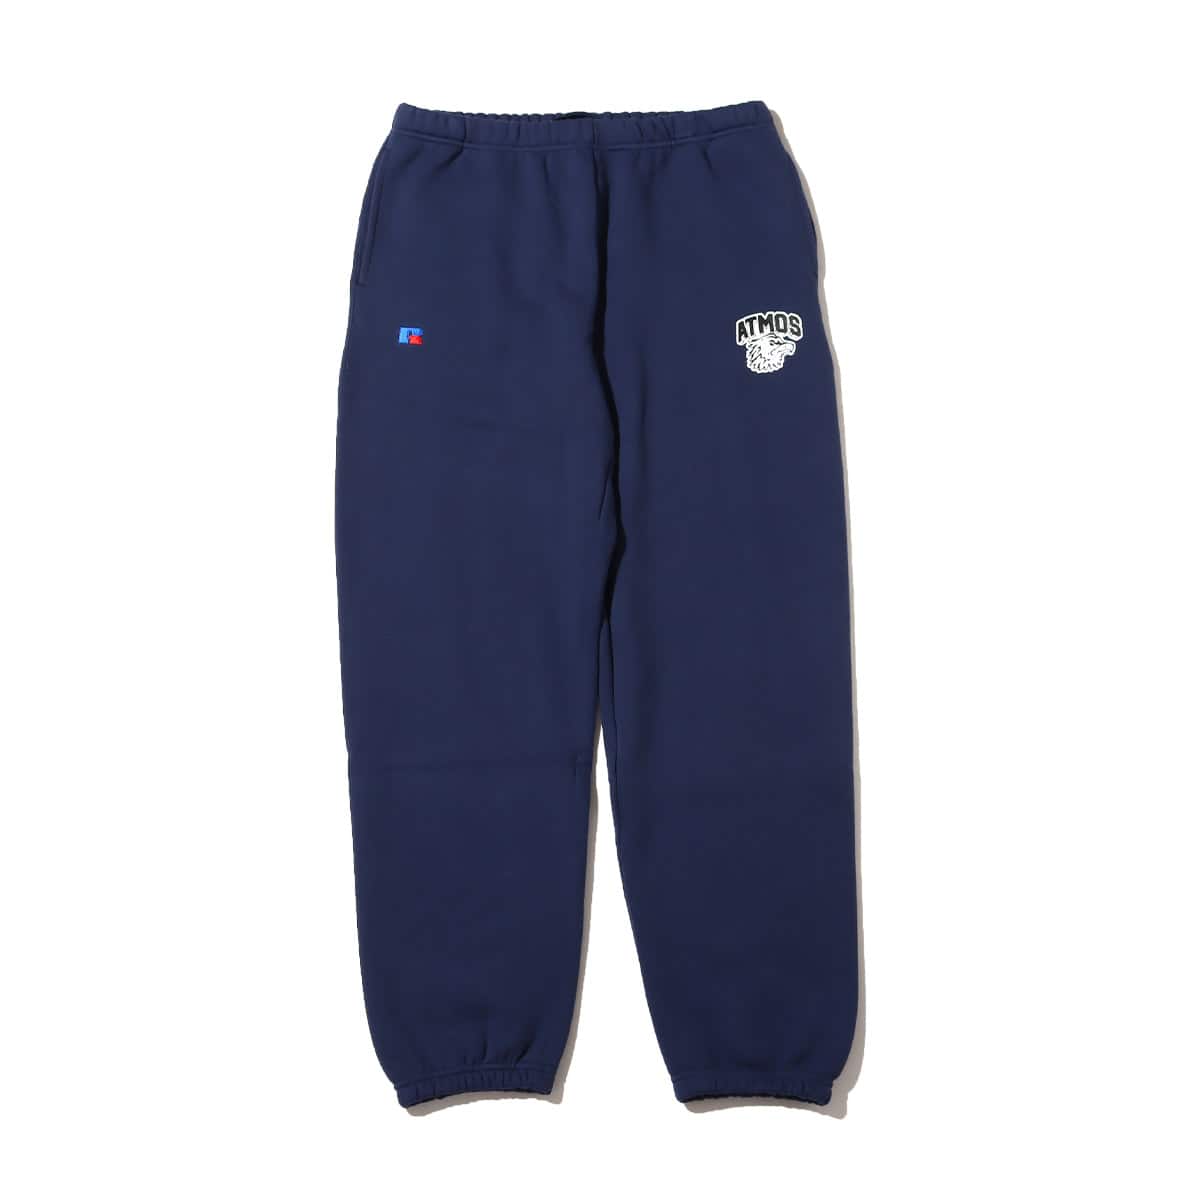 RUSSELL x atmos EAGLE LOGO SWEAT PANTS NAVY 22FA-S_photo_large